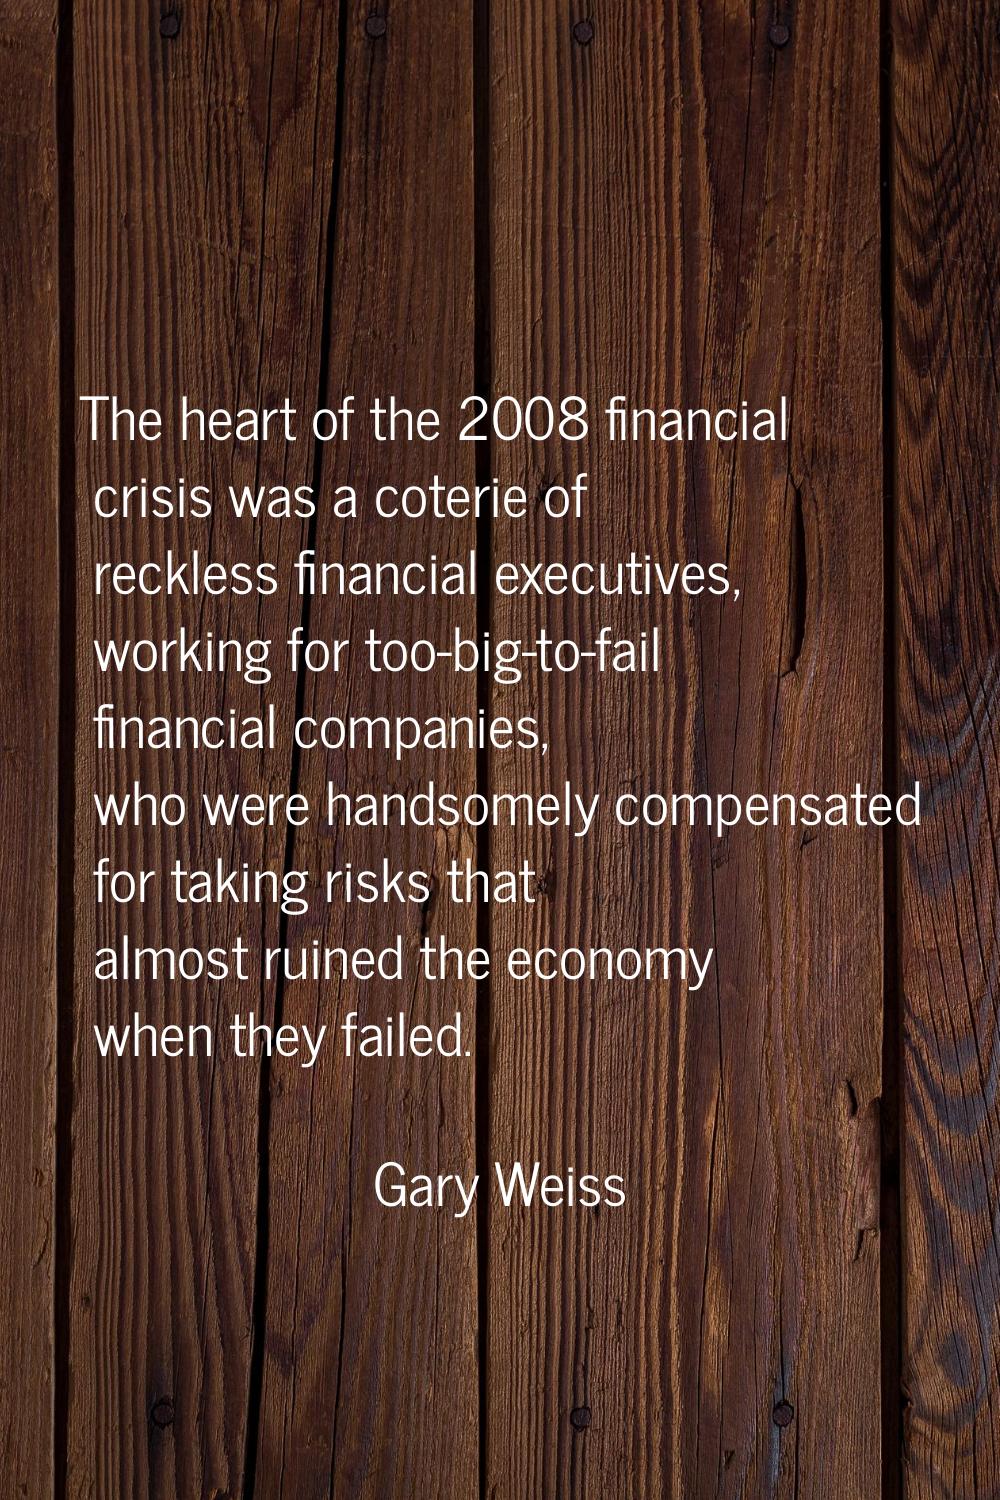 The heart of the 2008 financial crisis was a coterie of reckless financial executives, working for 